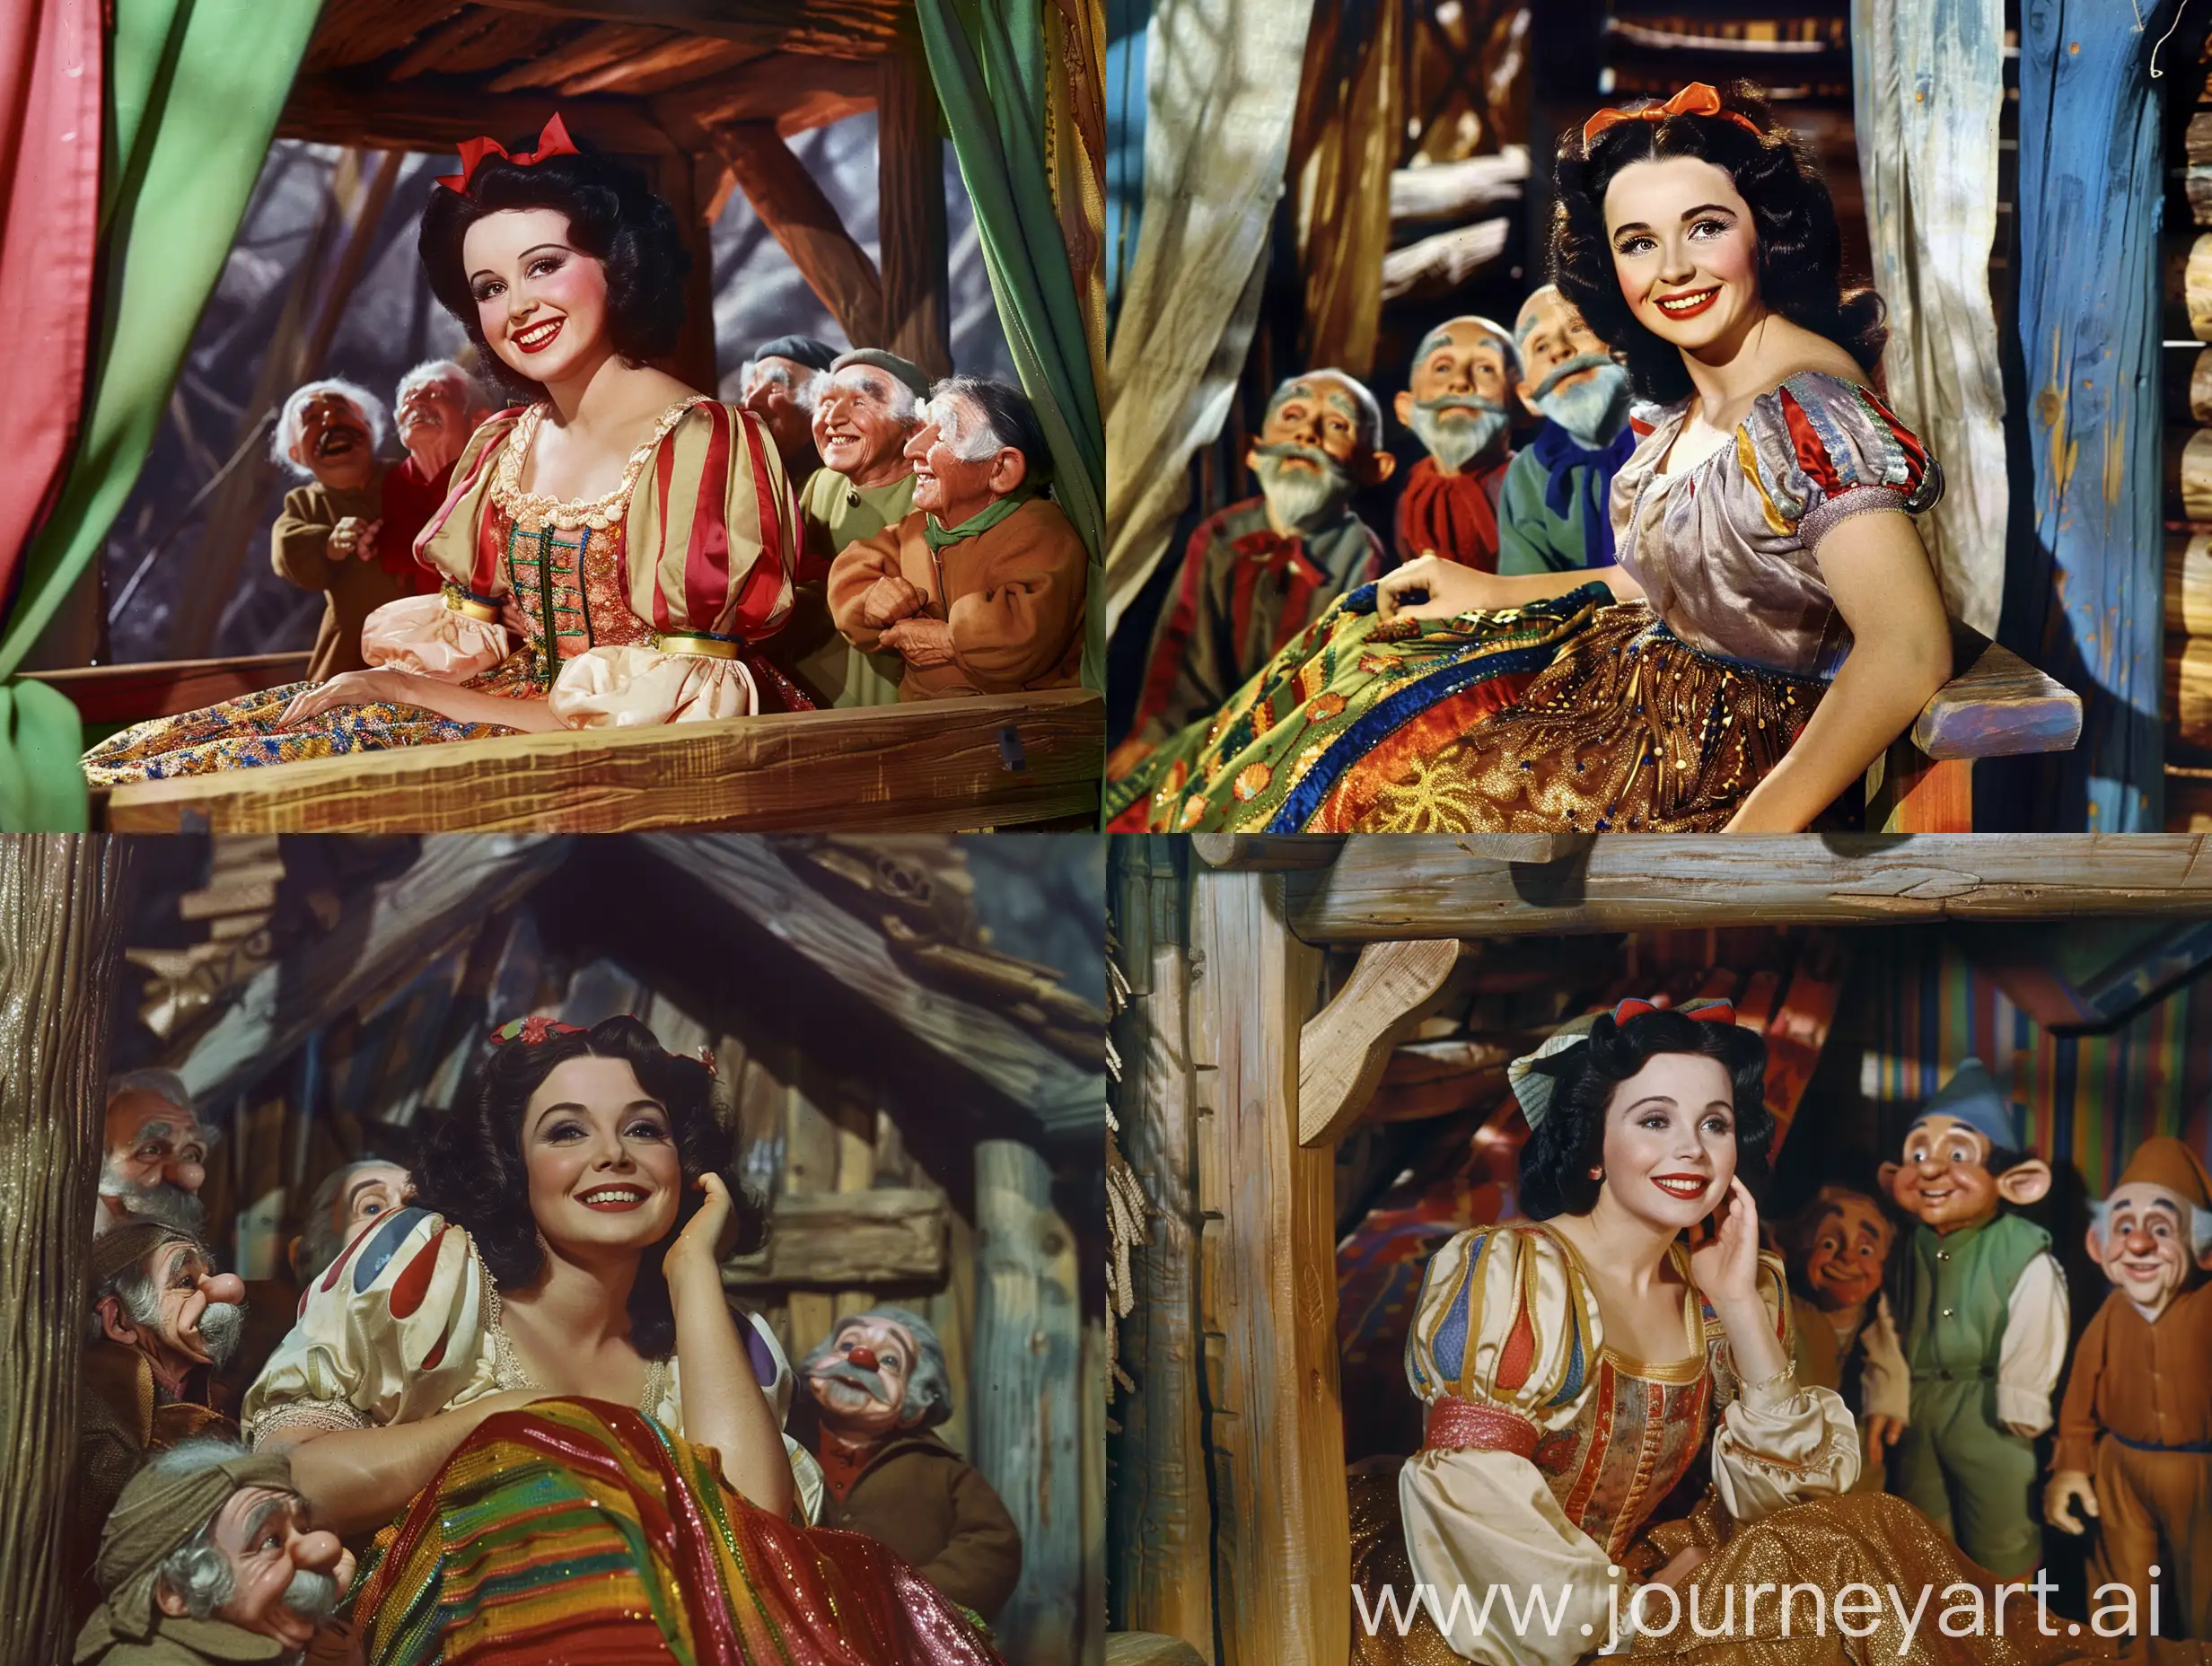 Elizabeth Taylor as the beautiful and smiling Snow White is sitting in a colorful wooden cabin. 7 kind human dwarfs from the story of Snow White are standing around her. Super Panavision 70s 1950s, color image, vintage quality